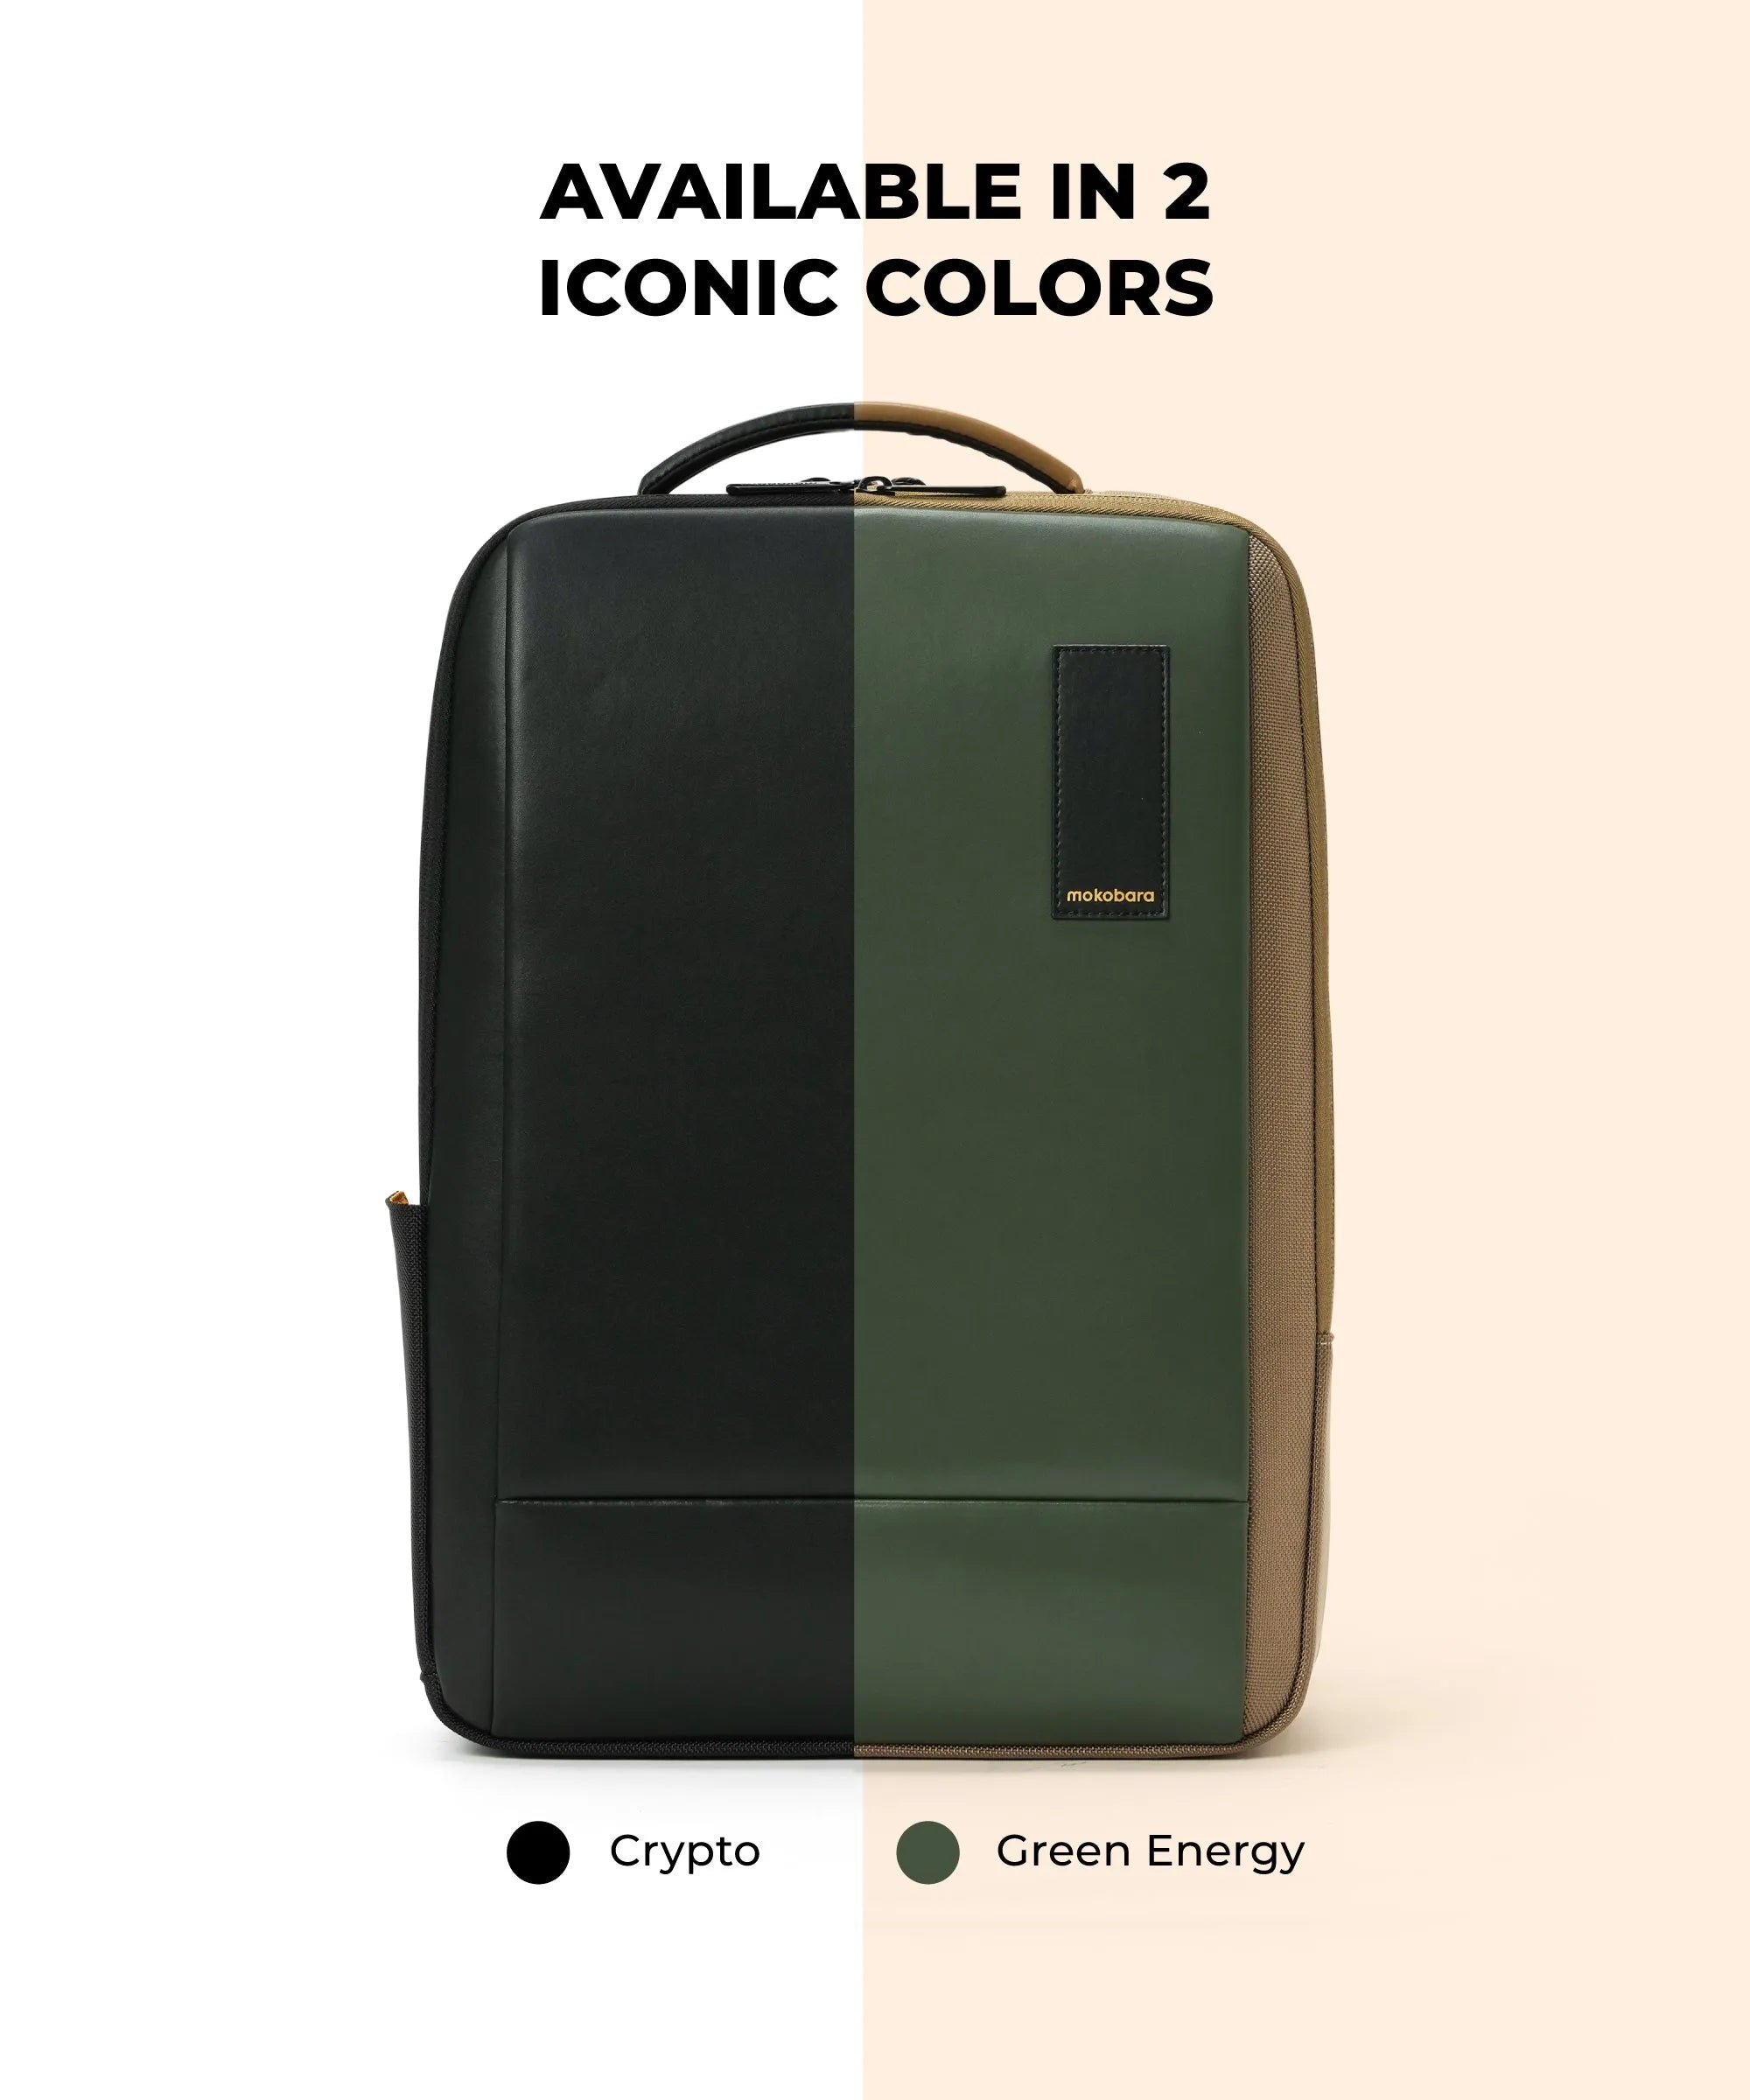 Color_Green Energy | The Element Backpack - 17L